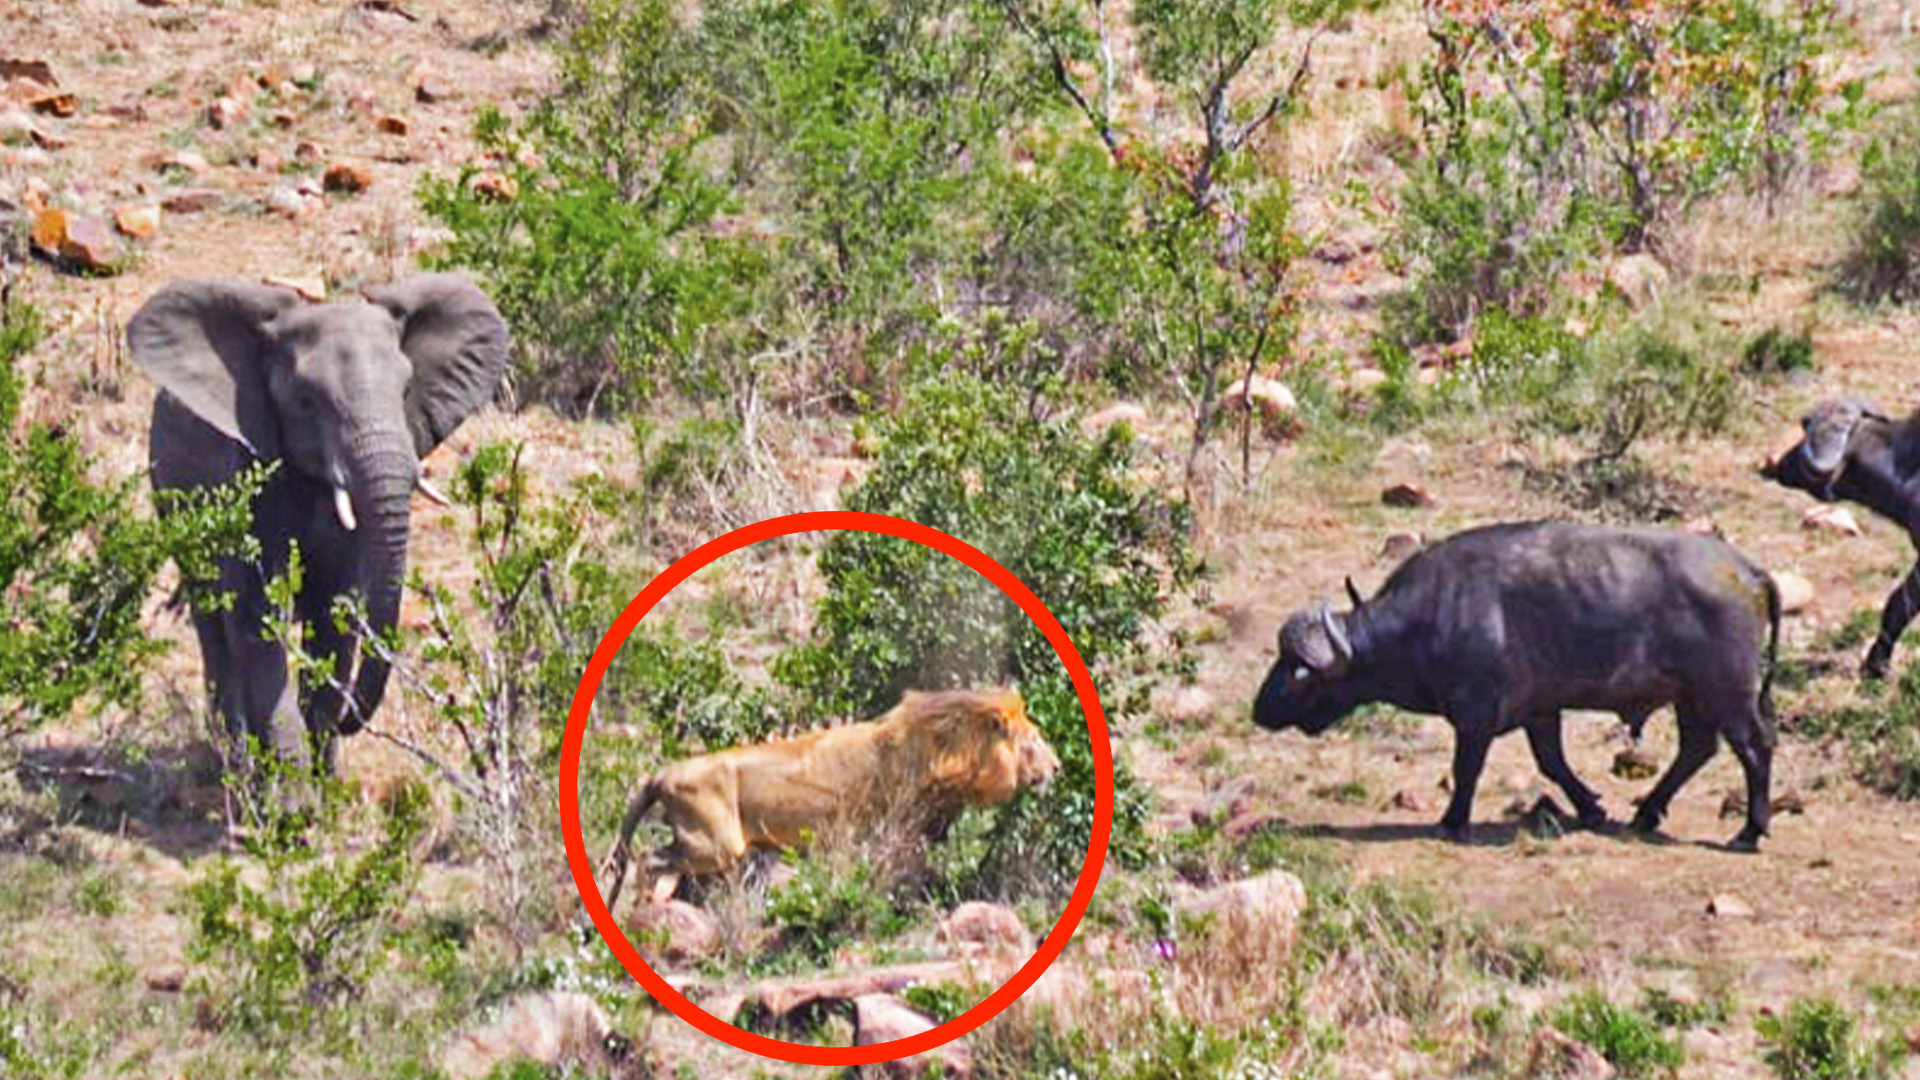 Elephants, Buffaloes, and Lions Battle it Out